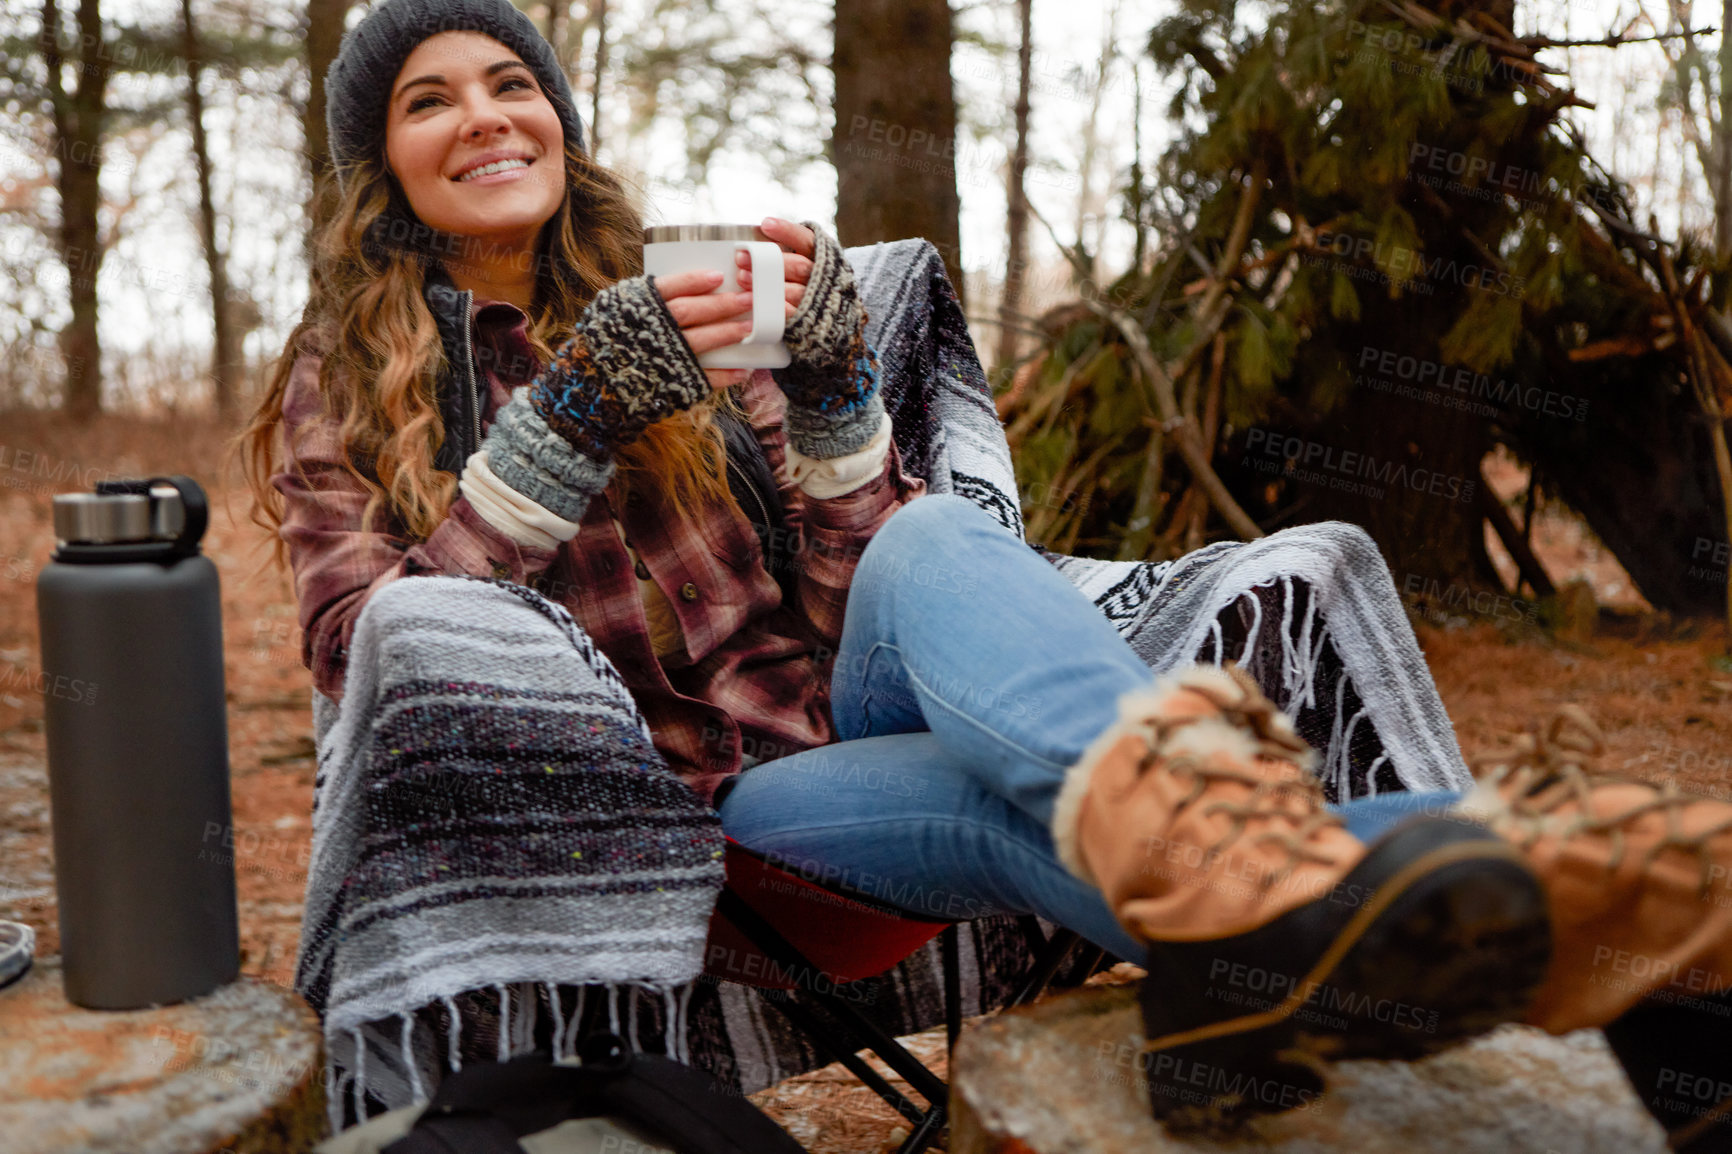 Buy stock photo Shot of a young woman drinking a warm beverage while camping in the wilderness during winter